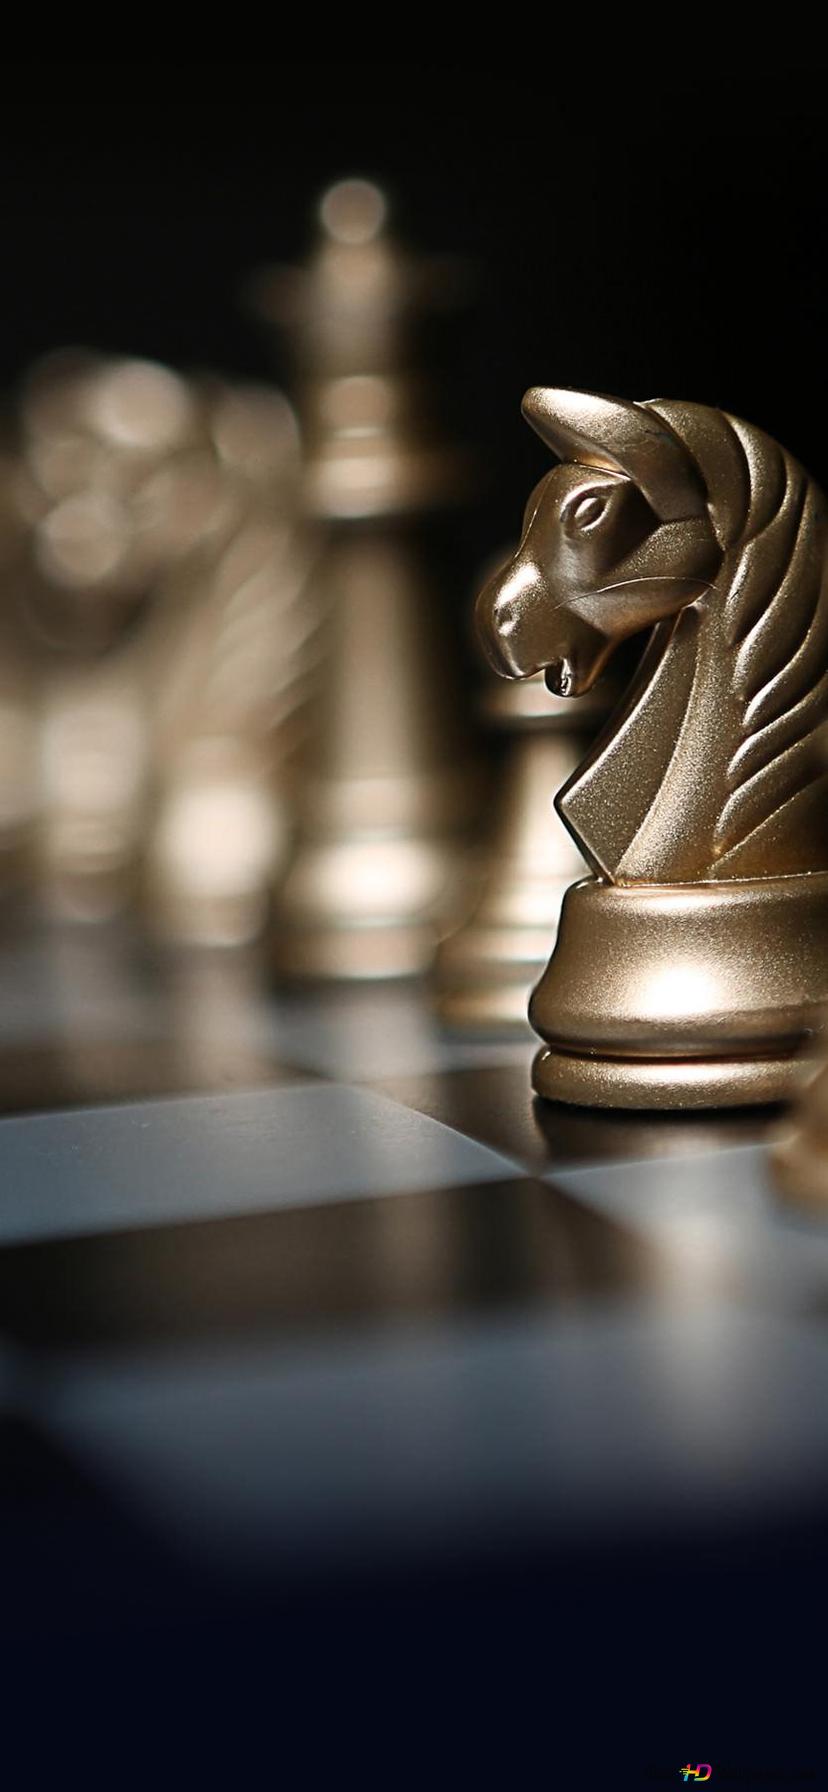 Clearly photographed horse among blurred chess pieces 2K wallpaper download